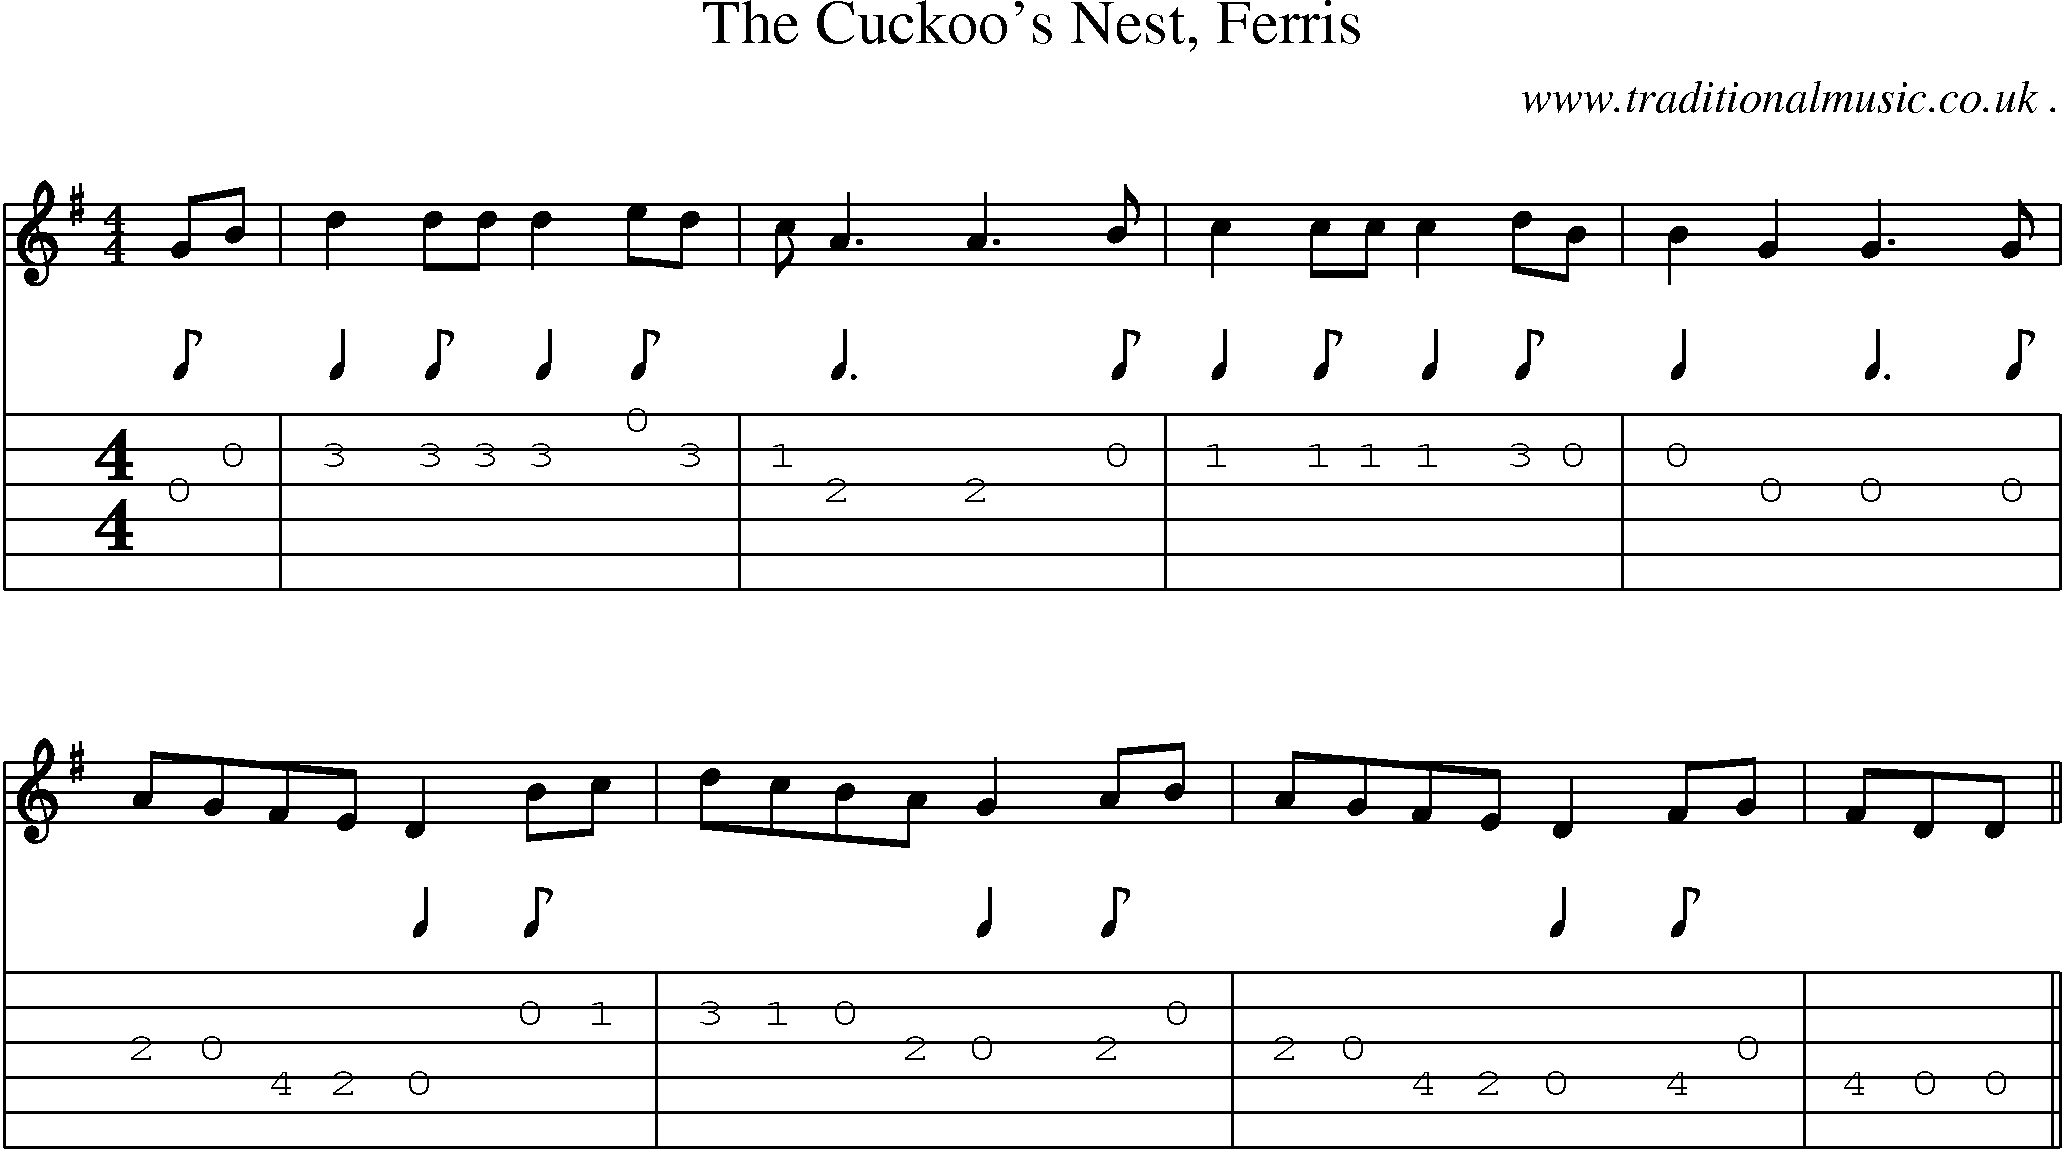 Sheet-Music and Guitar Tabs for The Cuckoos Nest Ferris